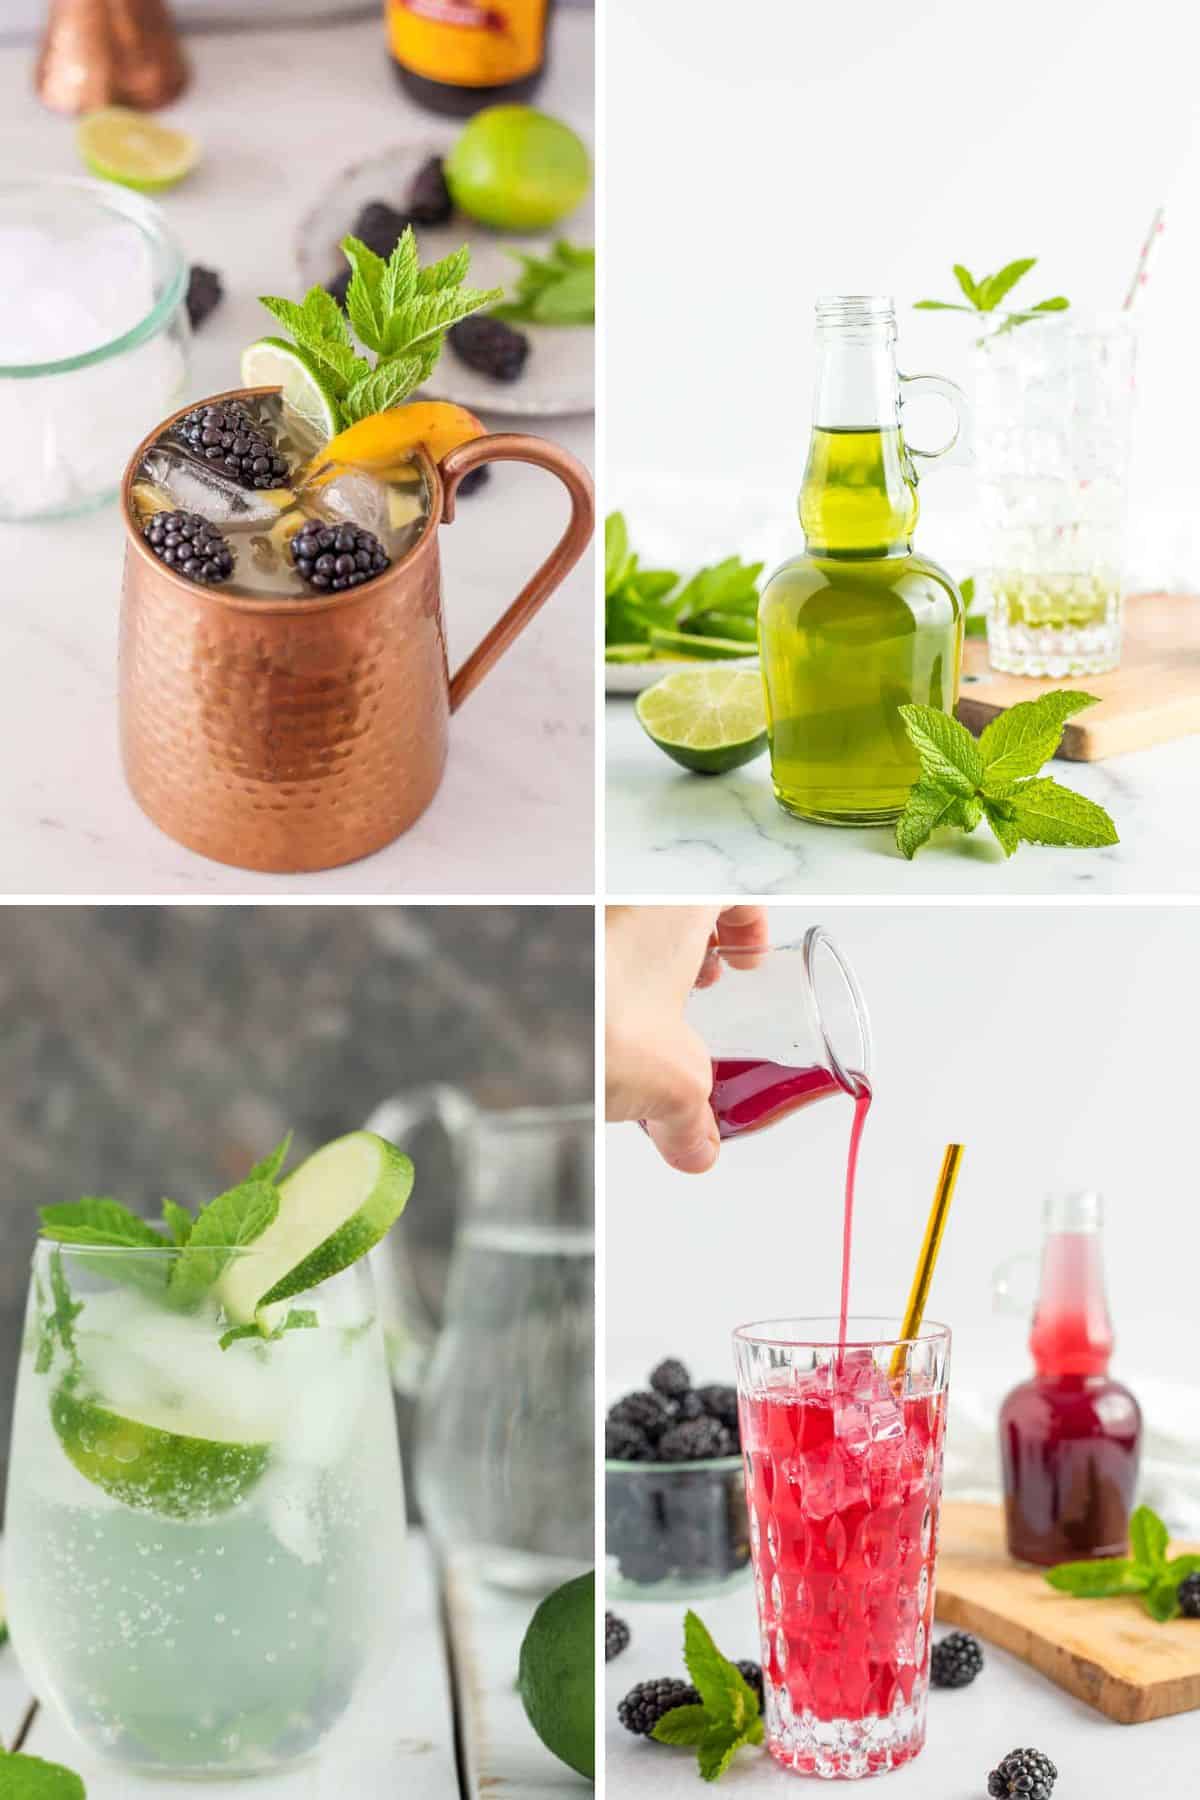 4 photos of mocktail and syrups.